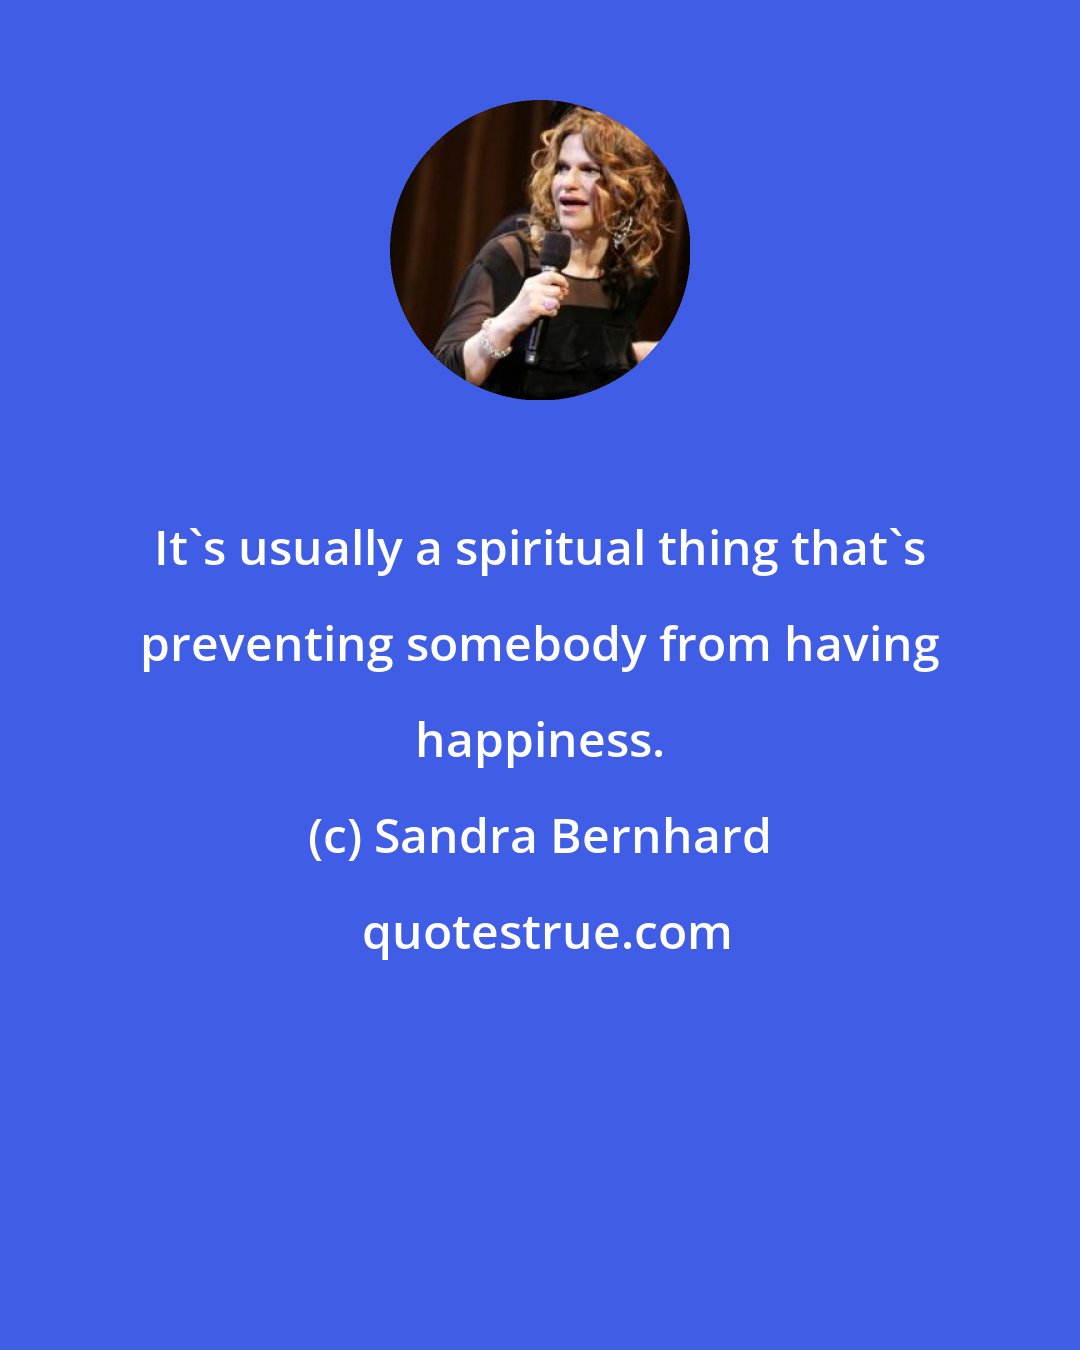 Sandra Bernhard: It's usually a spiritual thing that's preventing somebody from having happiness.